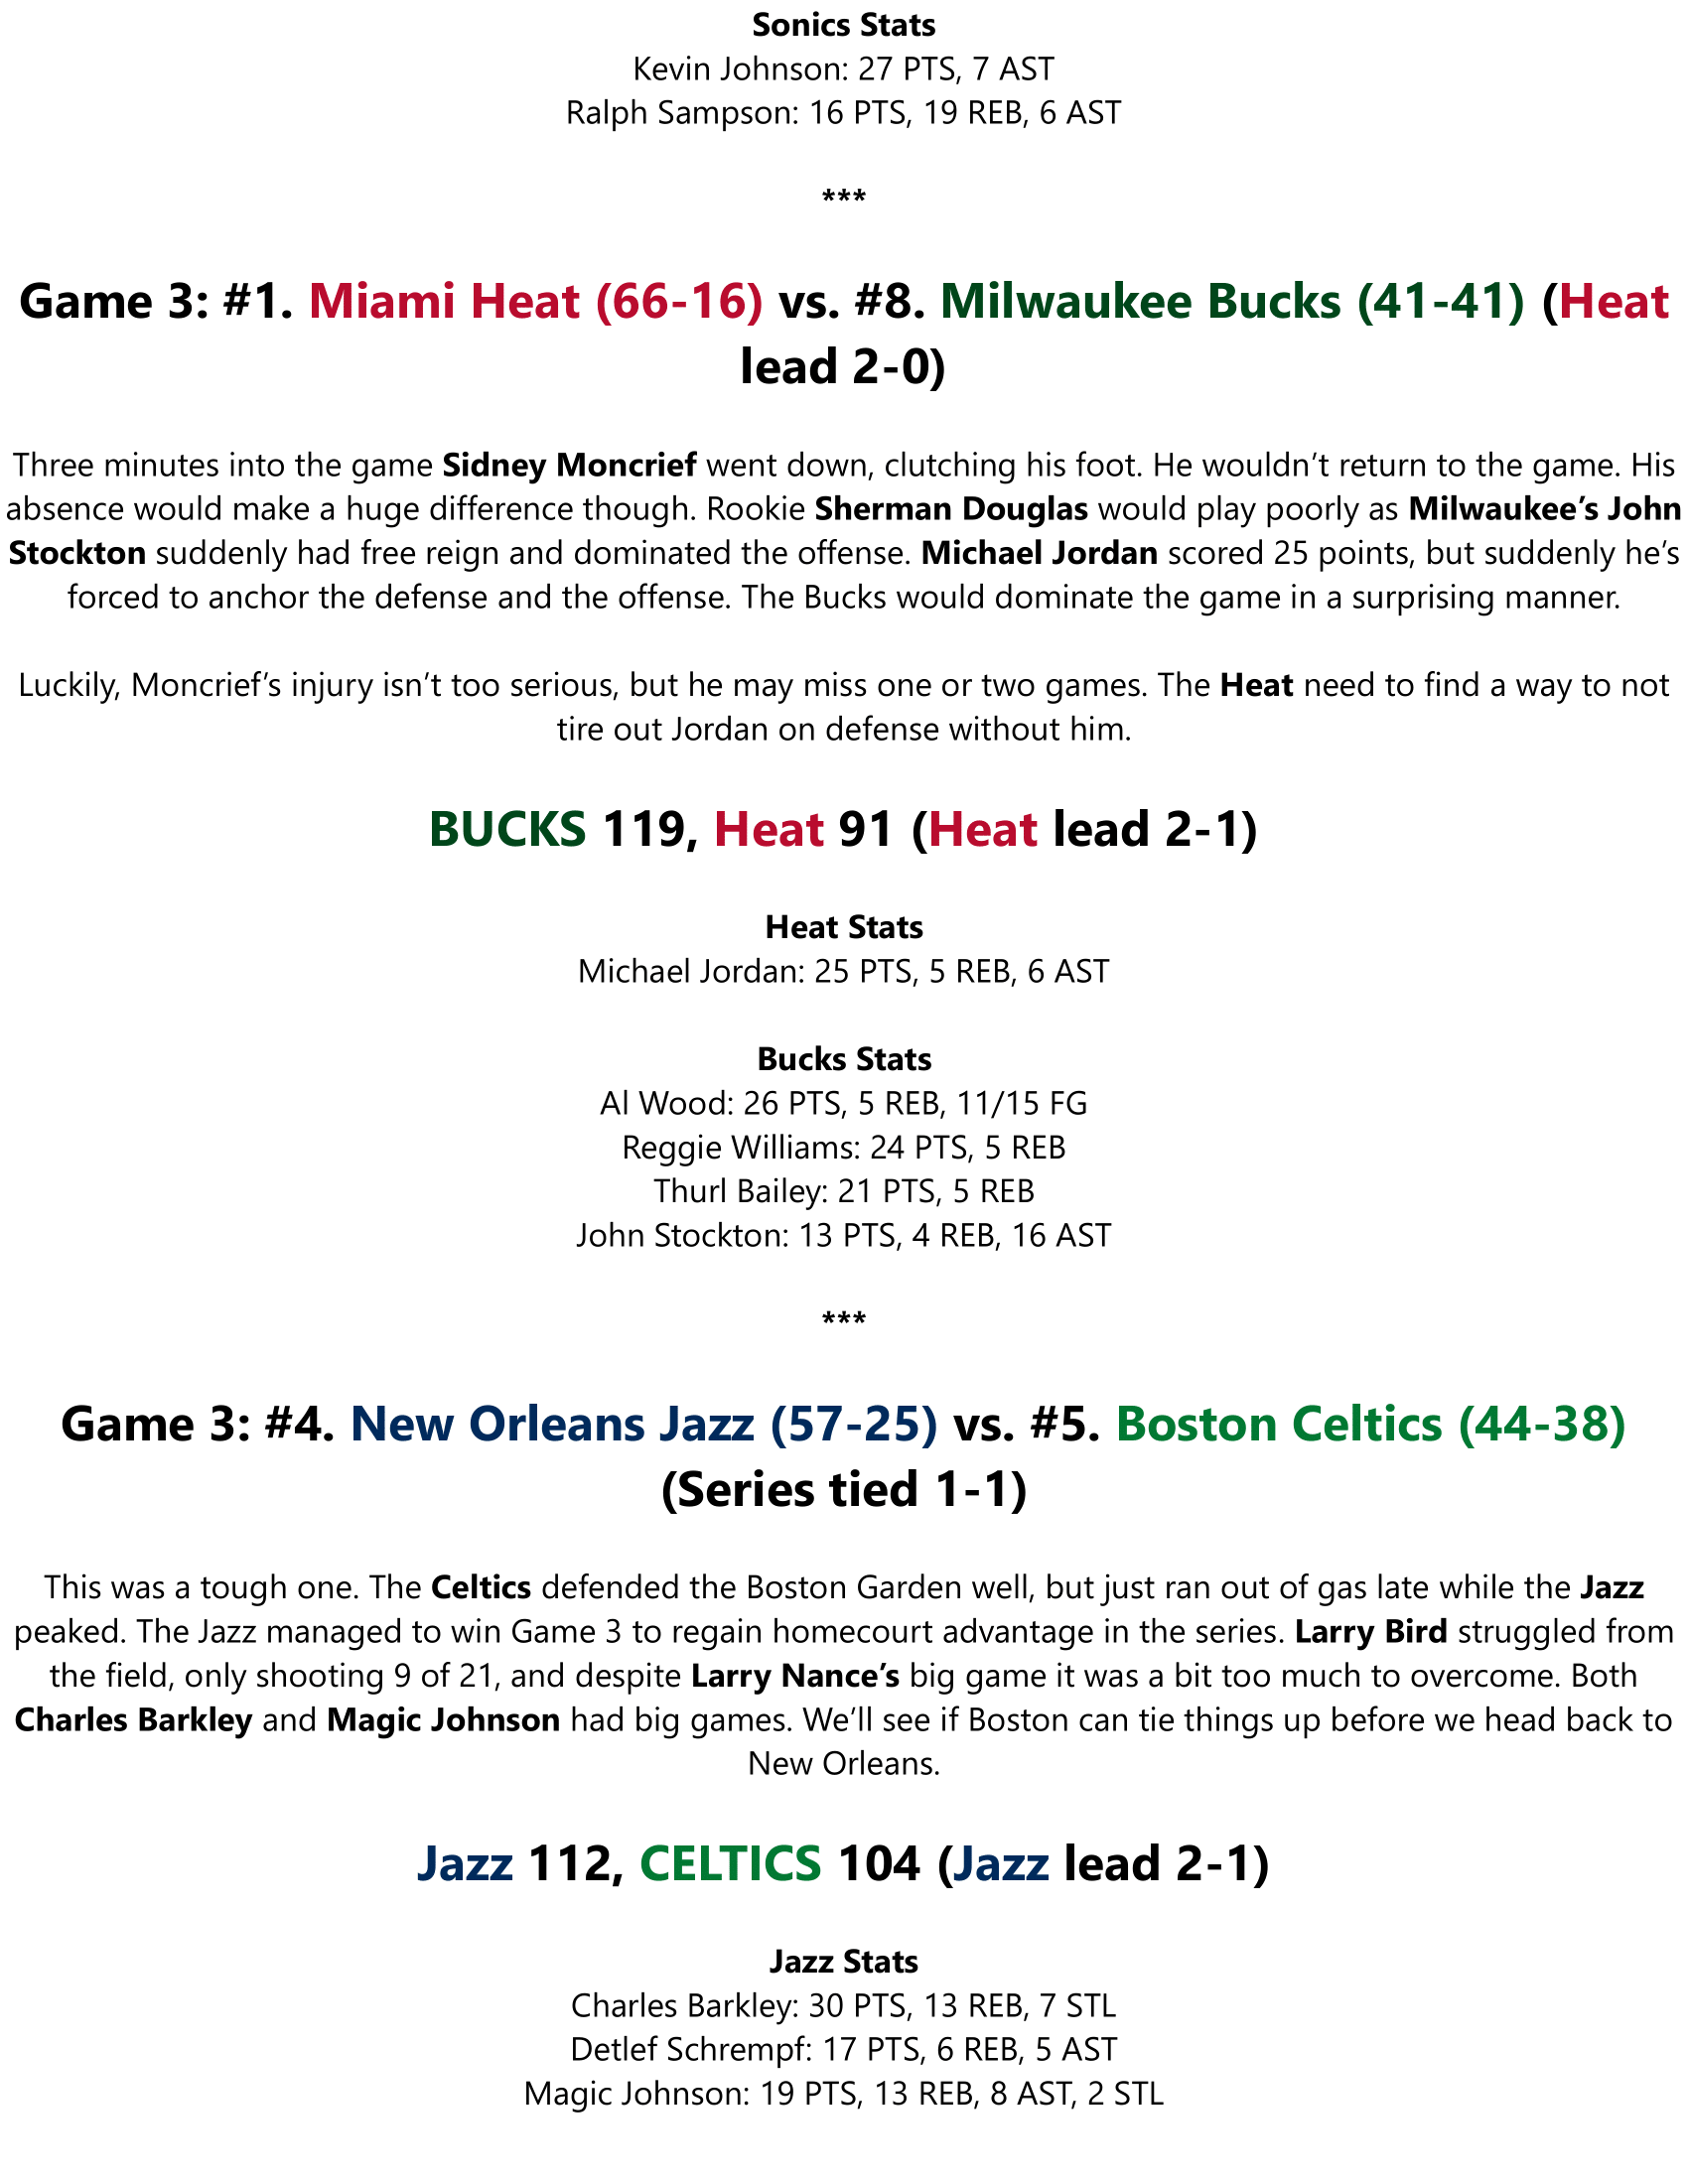 89-90-Part-5-Round-1-Semi-Preview-11.png